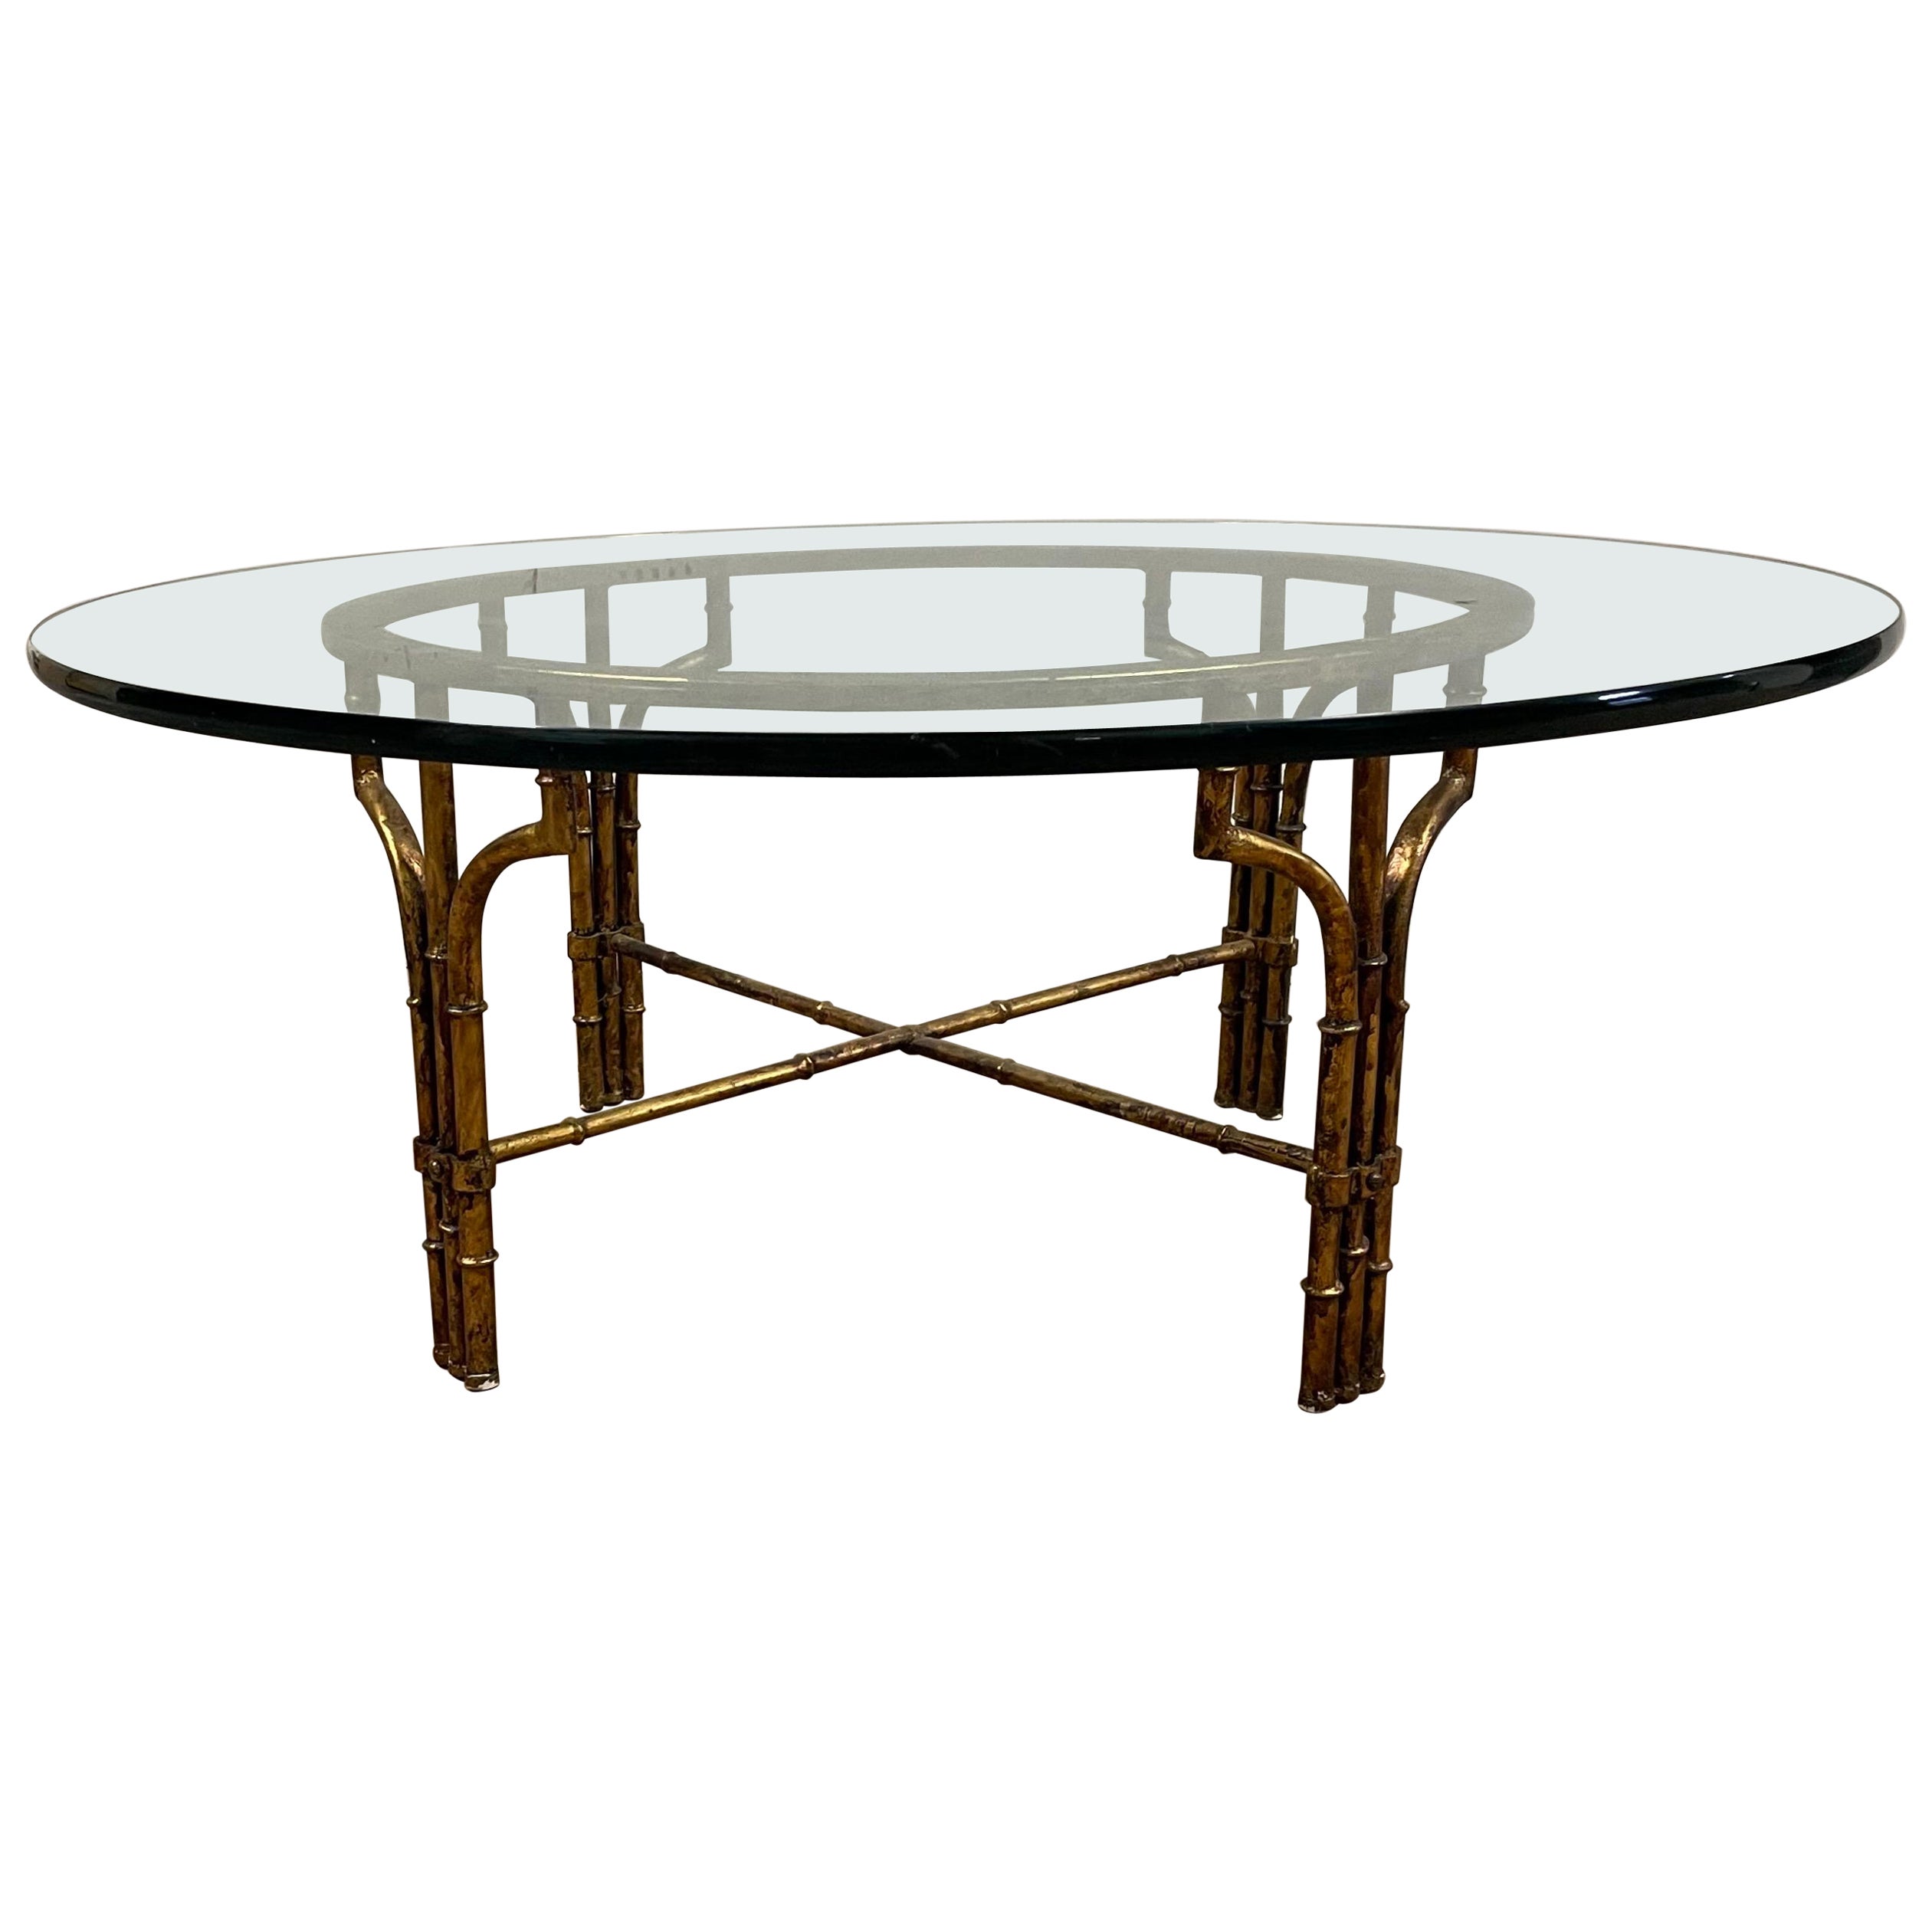 Italian Hollywood Regency Gold Gilt Faux Bamboo & Glass Round Cocktail Table For Sale